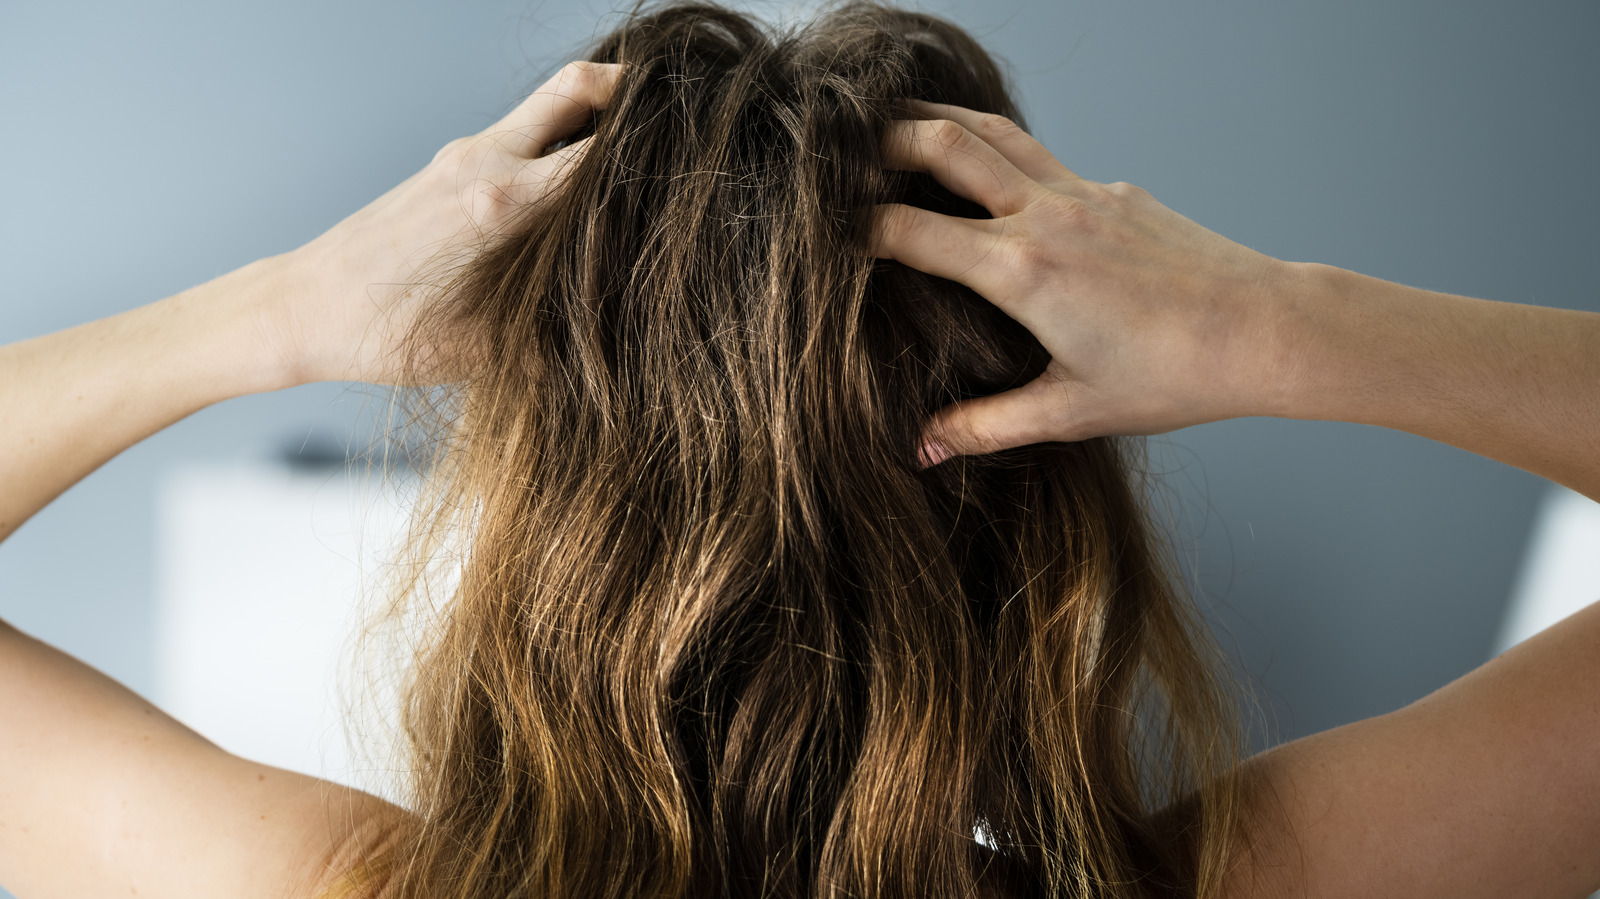 The Little-Known Haircare Ingredient That Could Change The Game For Your Scalp